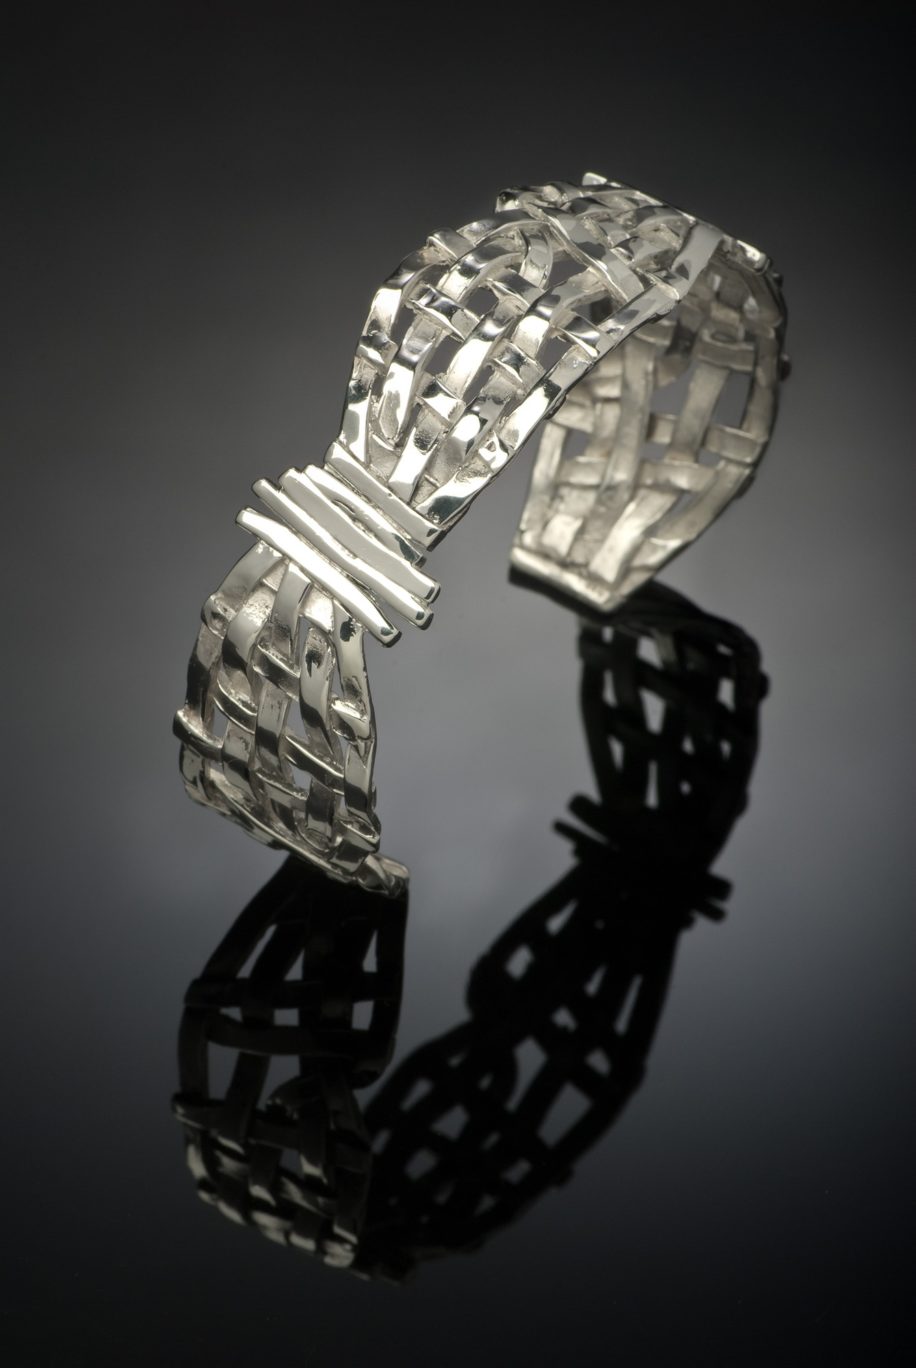 Woven Basket Cuff Bracelet by Chi’s Creations at The Avenue Gallery, a contemporary fine art gallery in Victoria, BC, Canada.